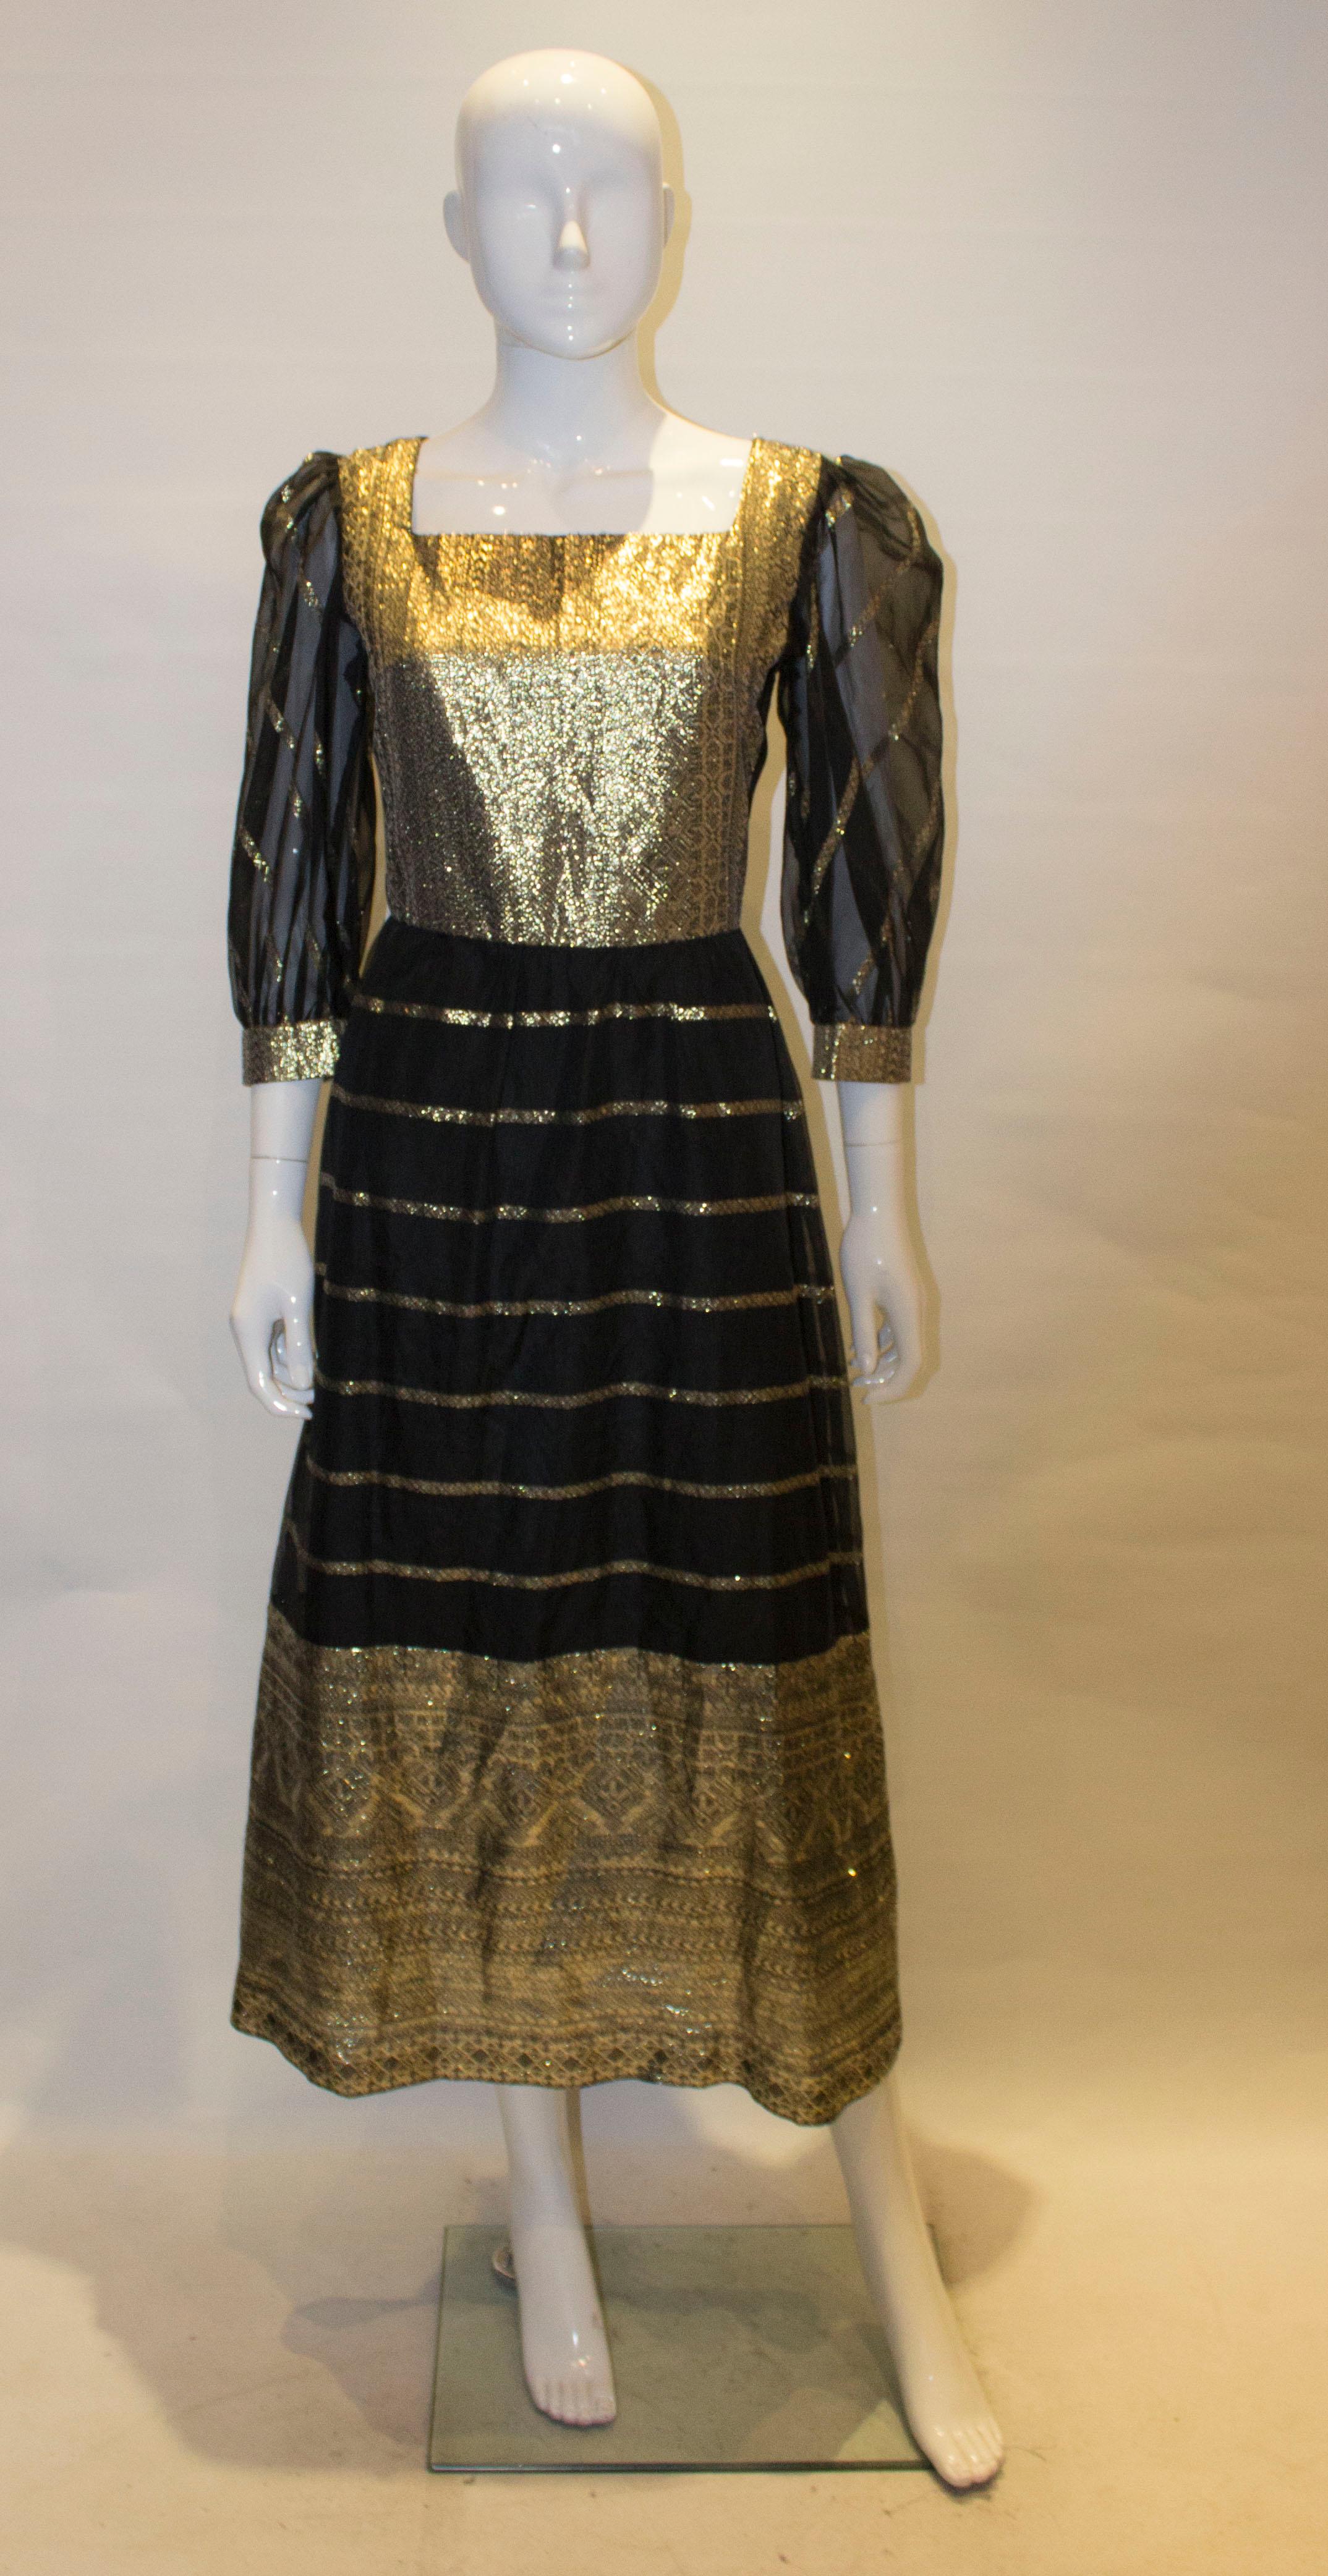 A fun dress from the 1970s. The dress has a gold panel on the front and back , with a square neckline and backline. It has a central back zip, sheer sleeves and gold cuffs, and a gold border at the hem. The dress is lined.